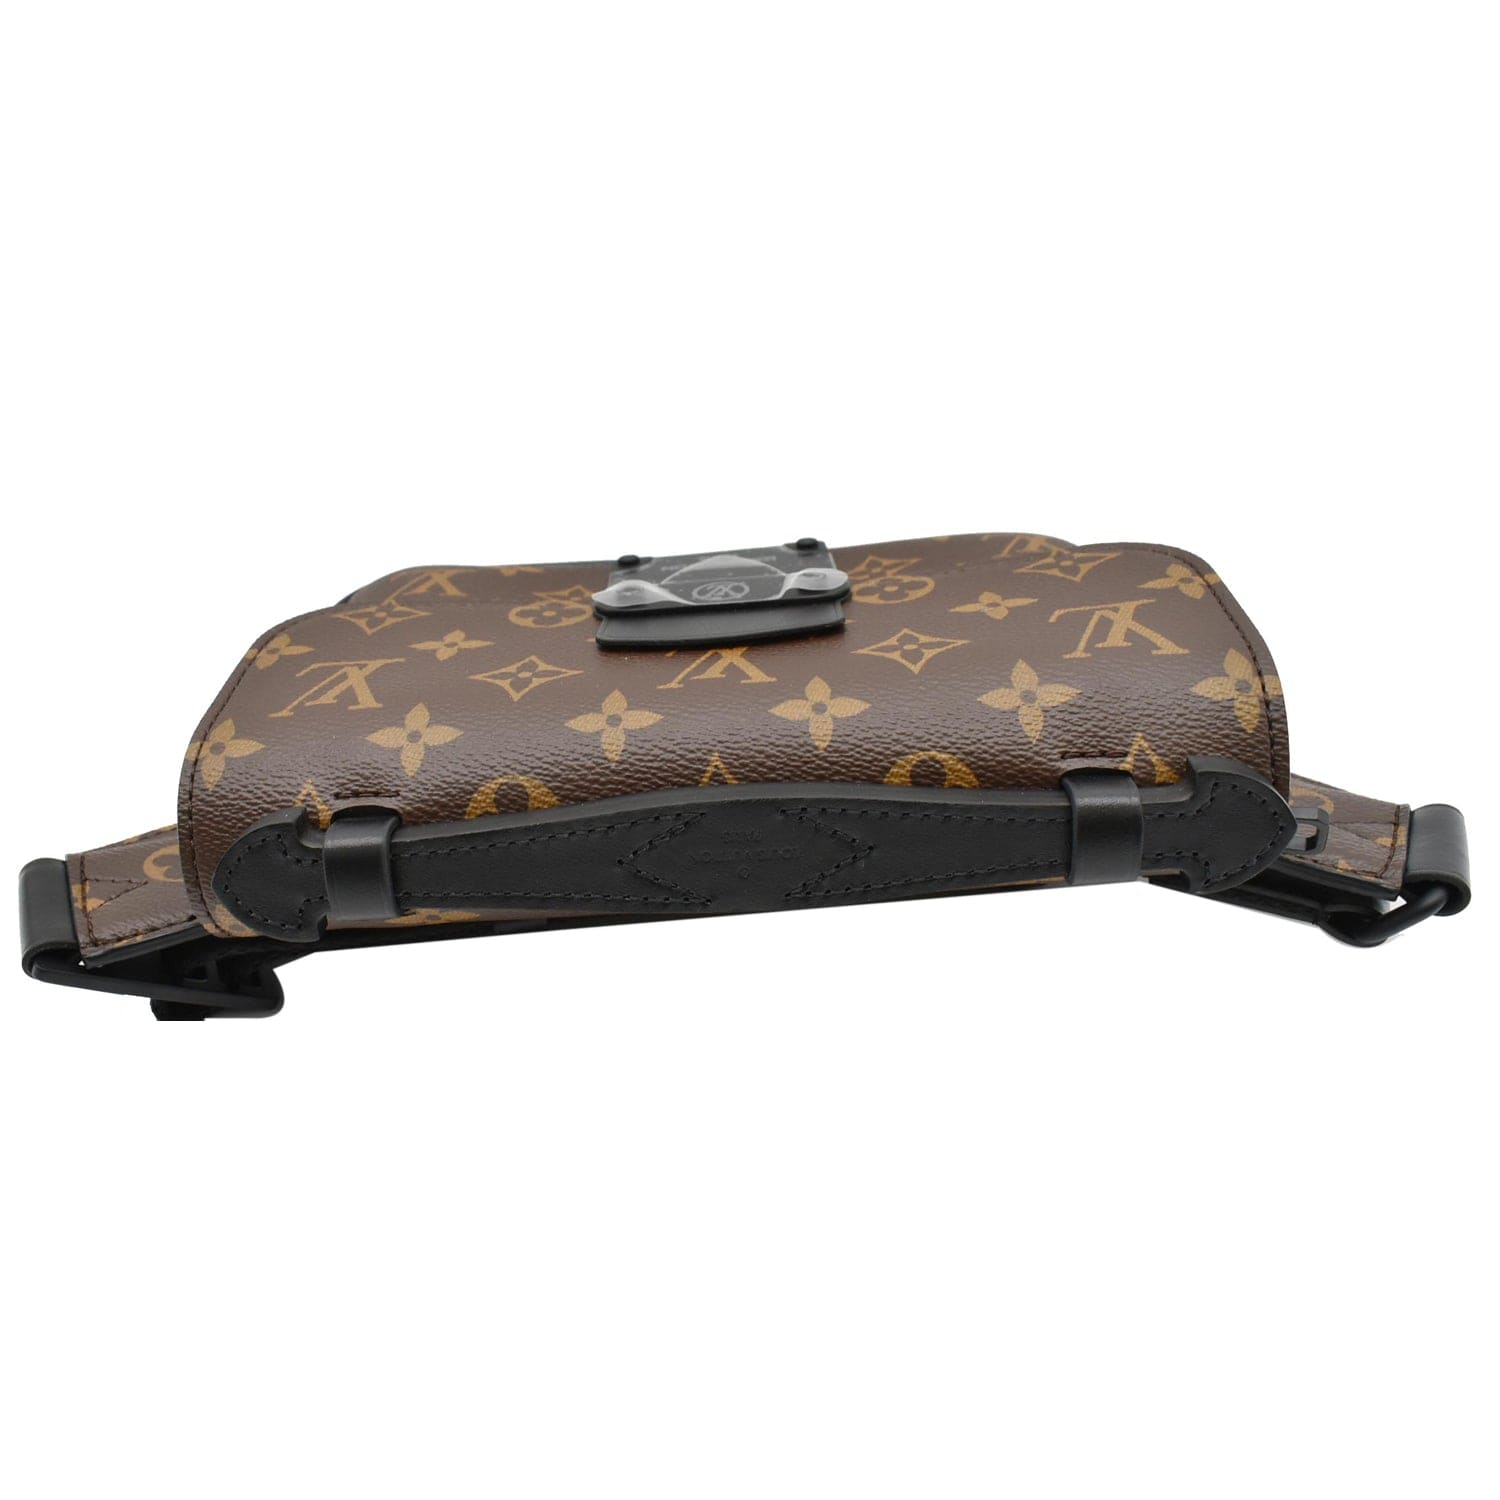 Authentic NEW Louis Vuitton Monogram Macassar Canvas S Lock Sling Bag –  Italy Station